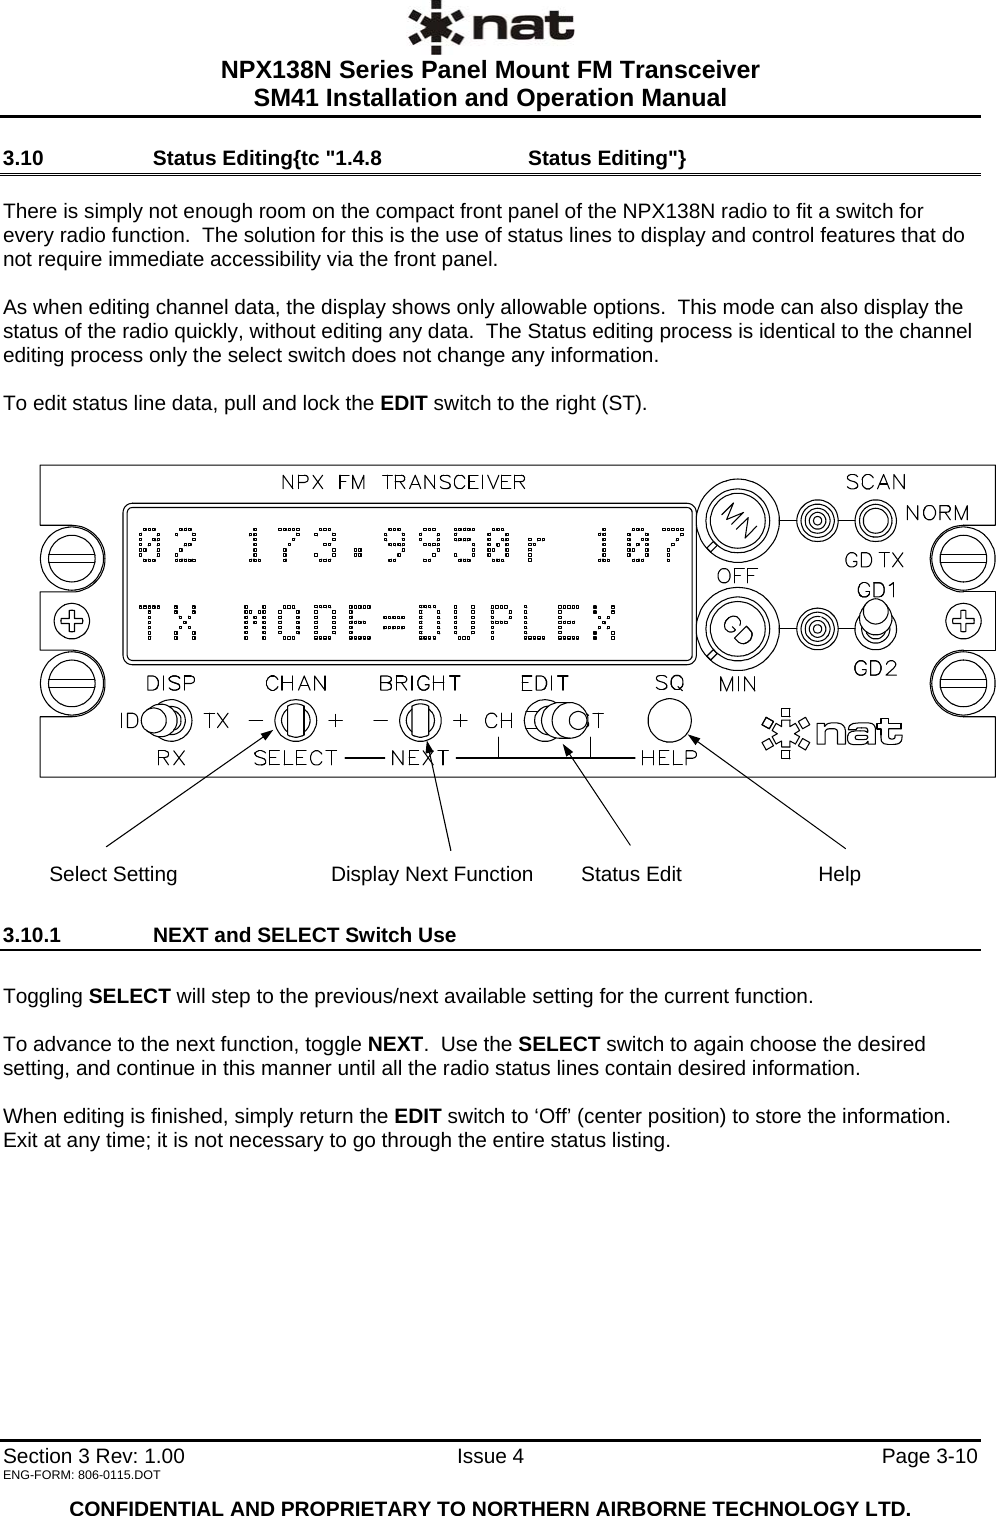  NPX138N Series Panel Mount FM Transceiver  SM41 Installation and Operation Manual   Section 3 Rev: 1.00   Issue 4  Page 3-10 3.10   Status Editing{tc &quot;1.4.8   Status Editing&quot;}  There is simply not enough room on the compact front panel of the NPX138N radio to fit a switch for every radio function.  The solution for this is the use of status lines to display and control features that do not require immediate accessibility via the front panel.    As when editing channel data, the display shows only allowable options.  This mode can also display the status of the radio quickly, without editing any data.  The Status editing process is identical to the channel editing process only the select switch does not change any information.  To edit status line data, pull and lock the EDIT switch to the right (ST).                         Select Setting  Display Next Function        Status Edit  Help 3.10.1  NEXT and SELECT Switch Use  Toggling SELECT will step to the previous/next available setting for the current function.  To advance to the next function, toggle NEXT.  Use the SELECT switch to again choose the desired setting, and continue in this manner until all the radio status lines contain desired information.   When editing is finished, simply return the EDIT switch to ‘Off’ (center position) to store the information.  Exit at any time; it is not necessary to go through the entire status listing.         ENG-FORM: 806-0115.DOT  CONFIDENTIAL AND PROPRIETARY TO NORTHERN AIRBORNE TECHNOLOGY LTD. 